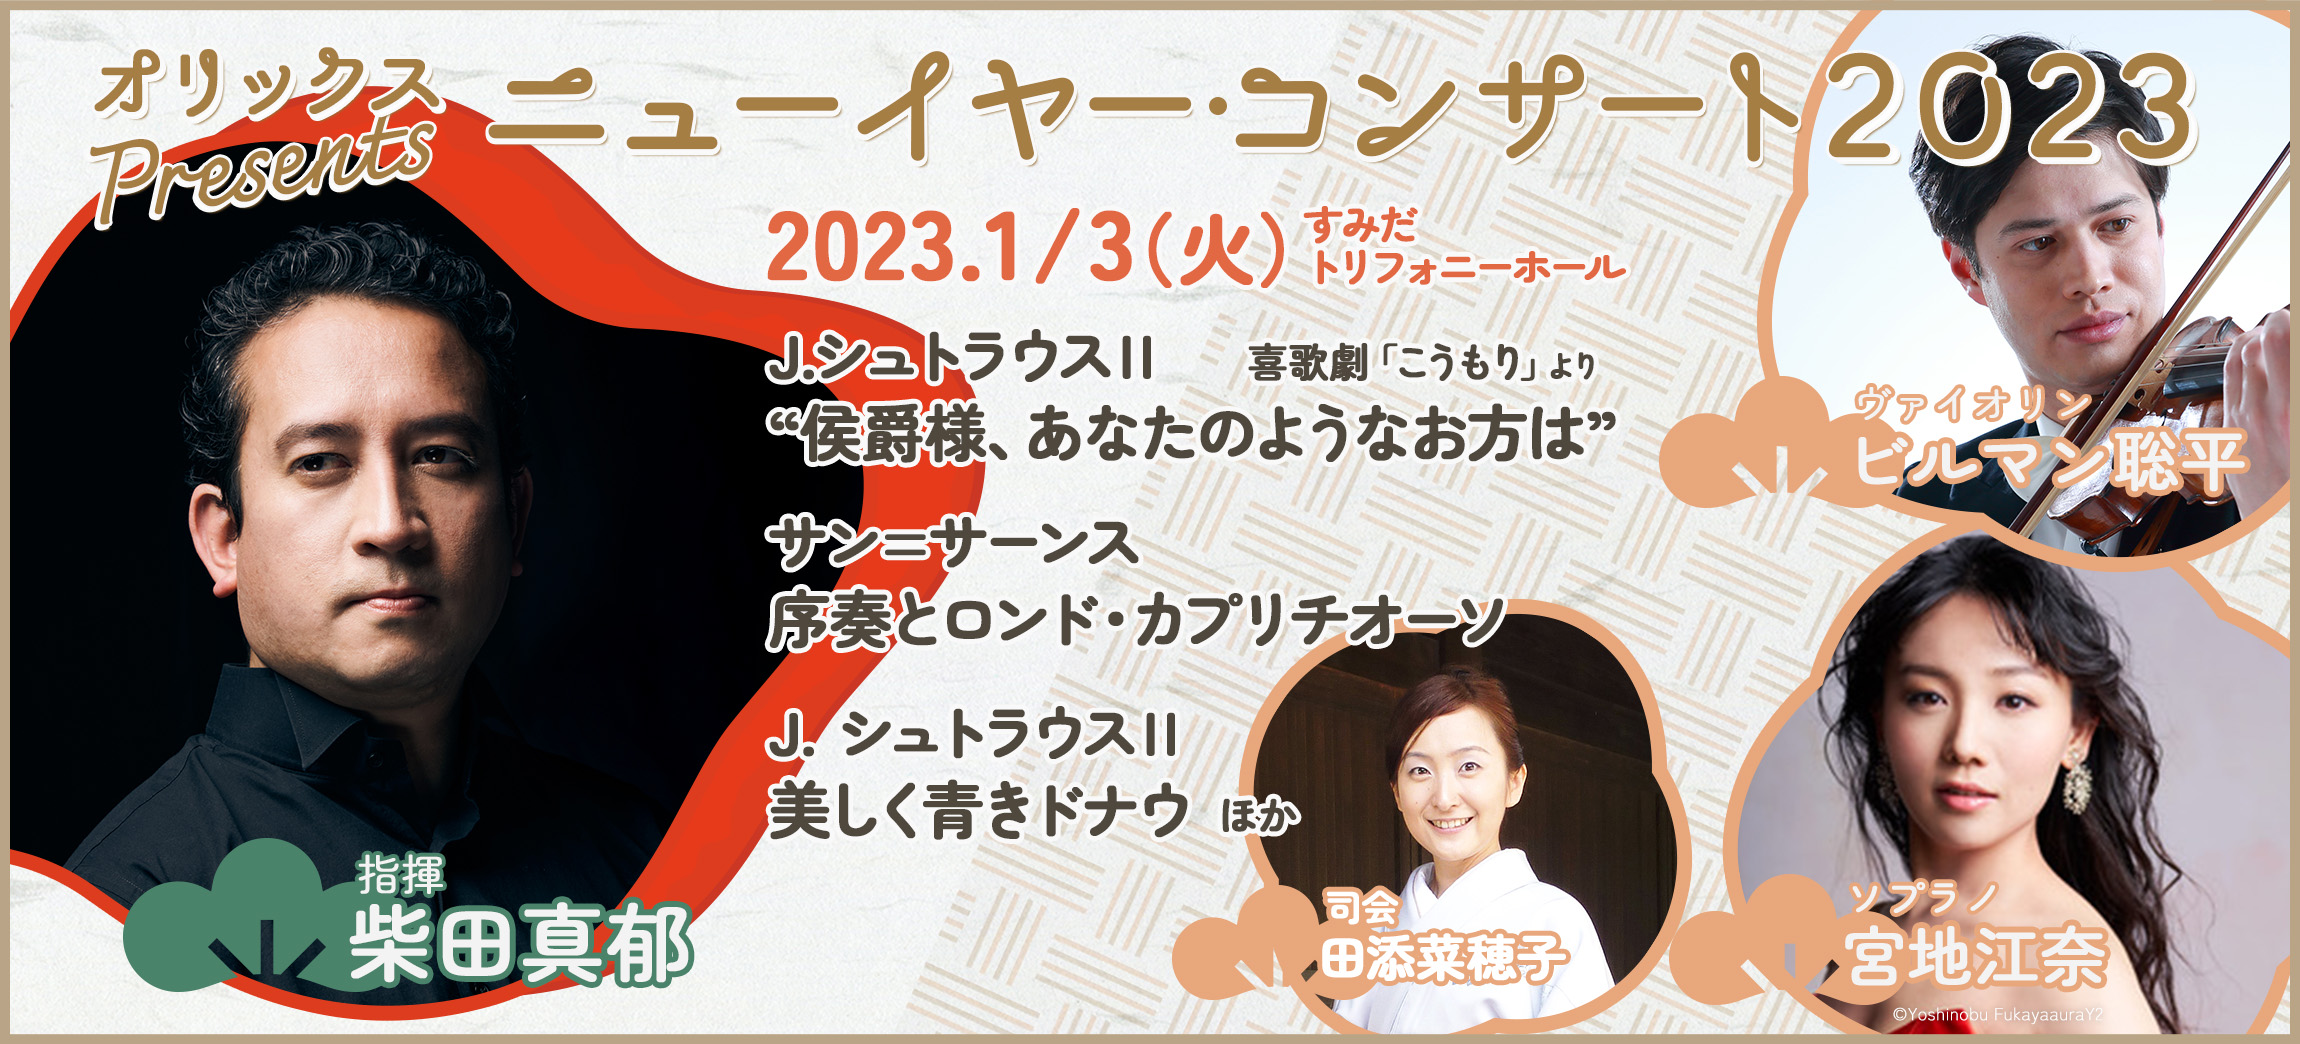 ORIX Presents New Year's Concert 2023 | [Official] New Japan